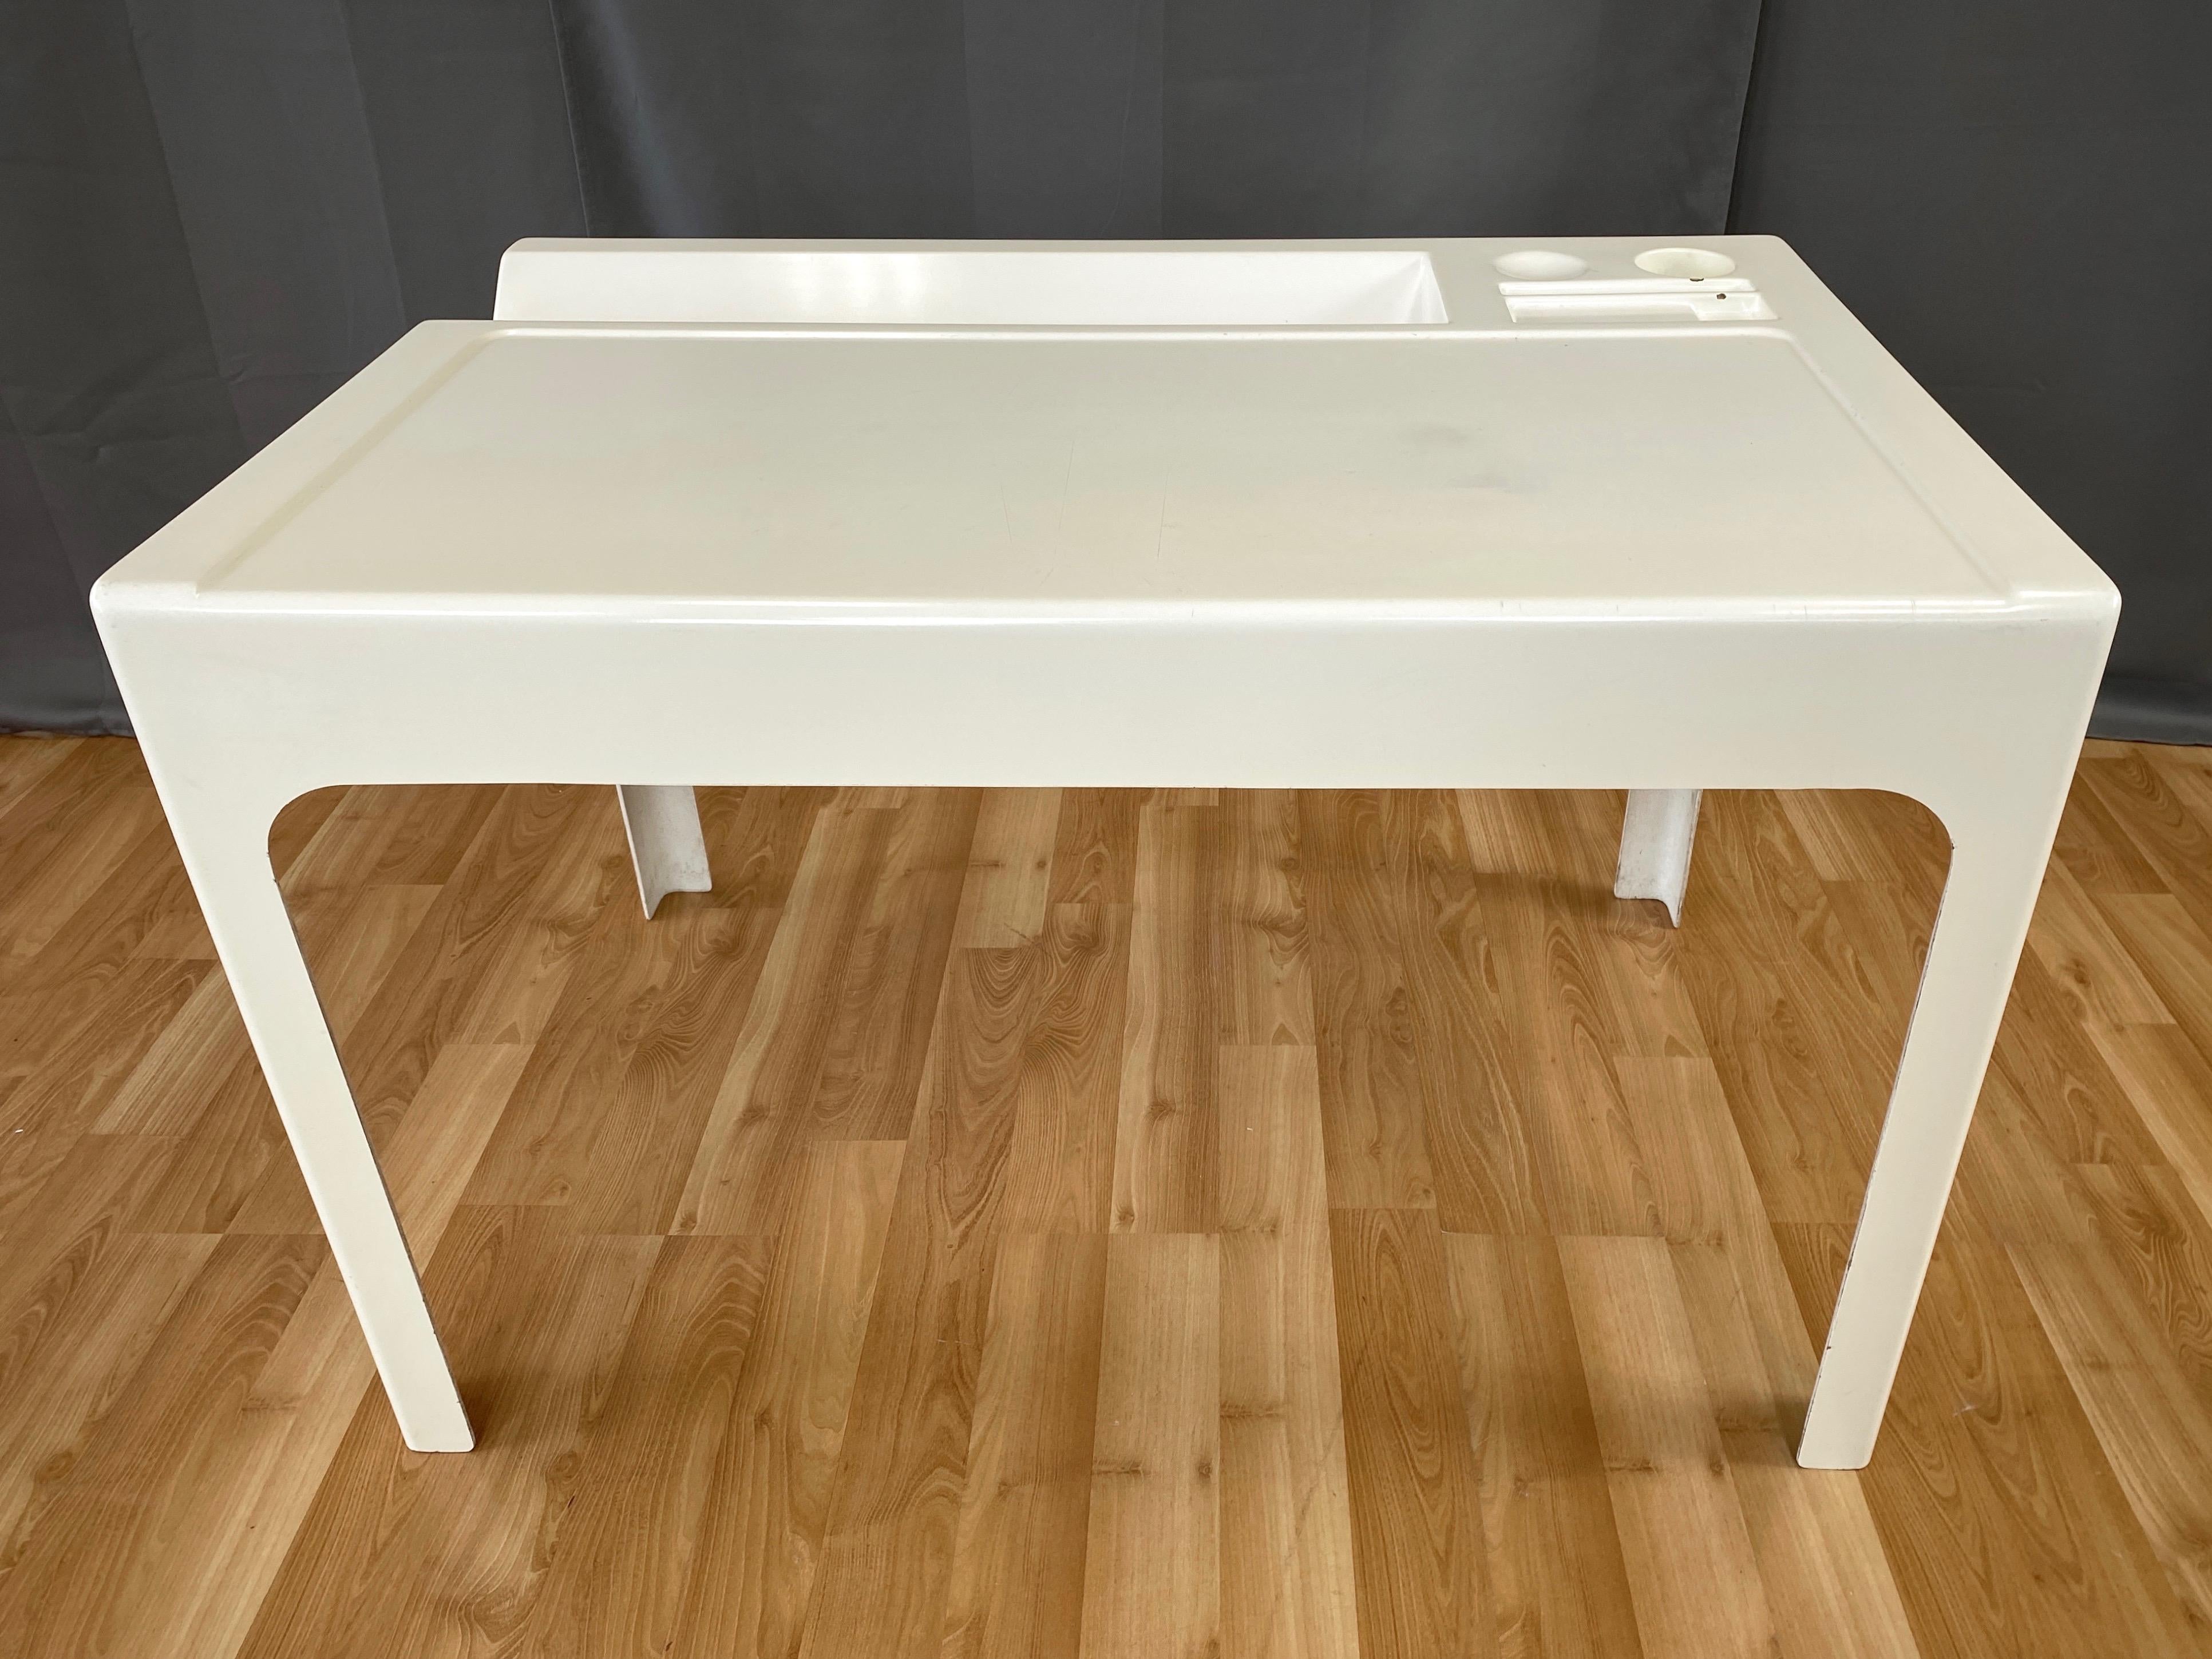 A 1967 early production white Ozoo desk by innovative French architect and designer Marc Berthier for D.A.N.

Minimalist unibody fiberglass form with integrated book or magazine trough, pen & pencil cup, and various other recessed spots to hold